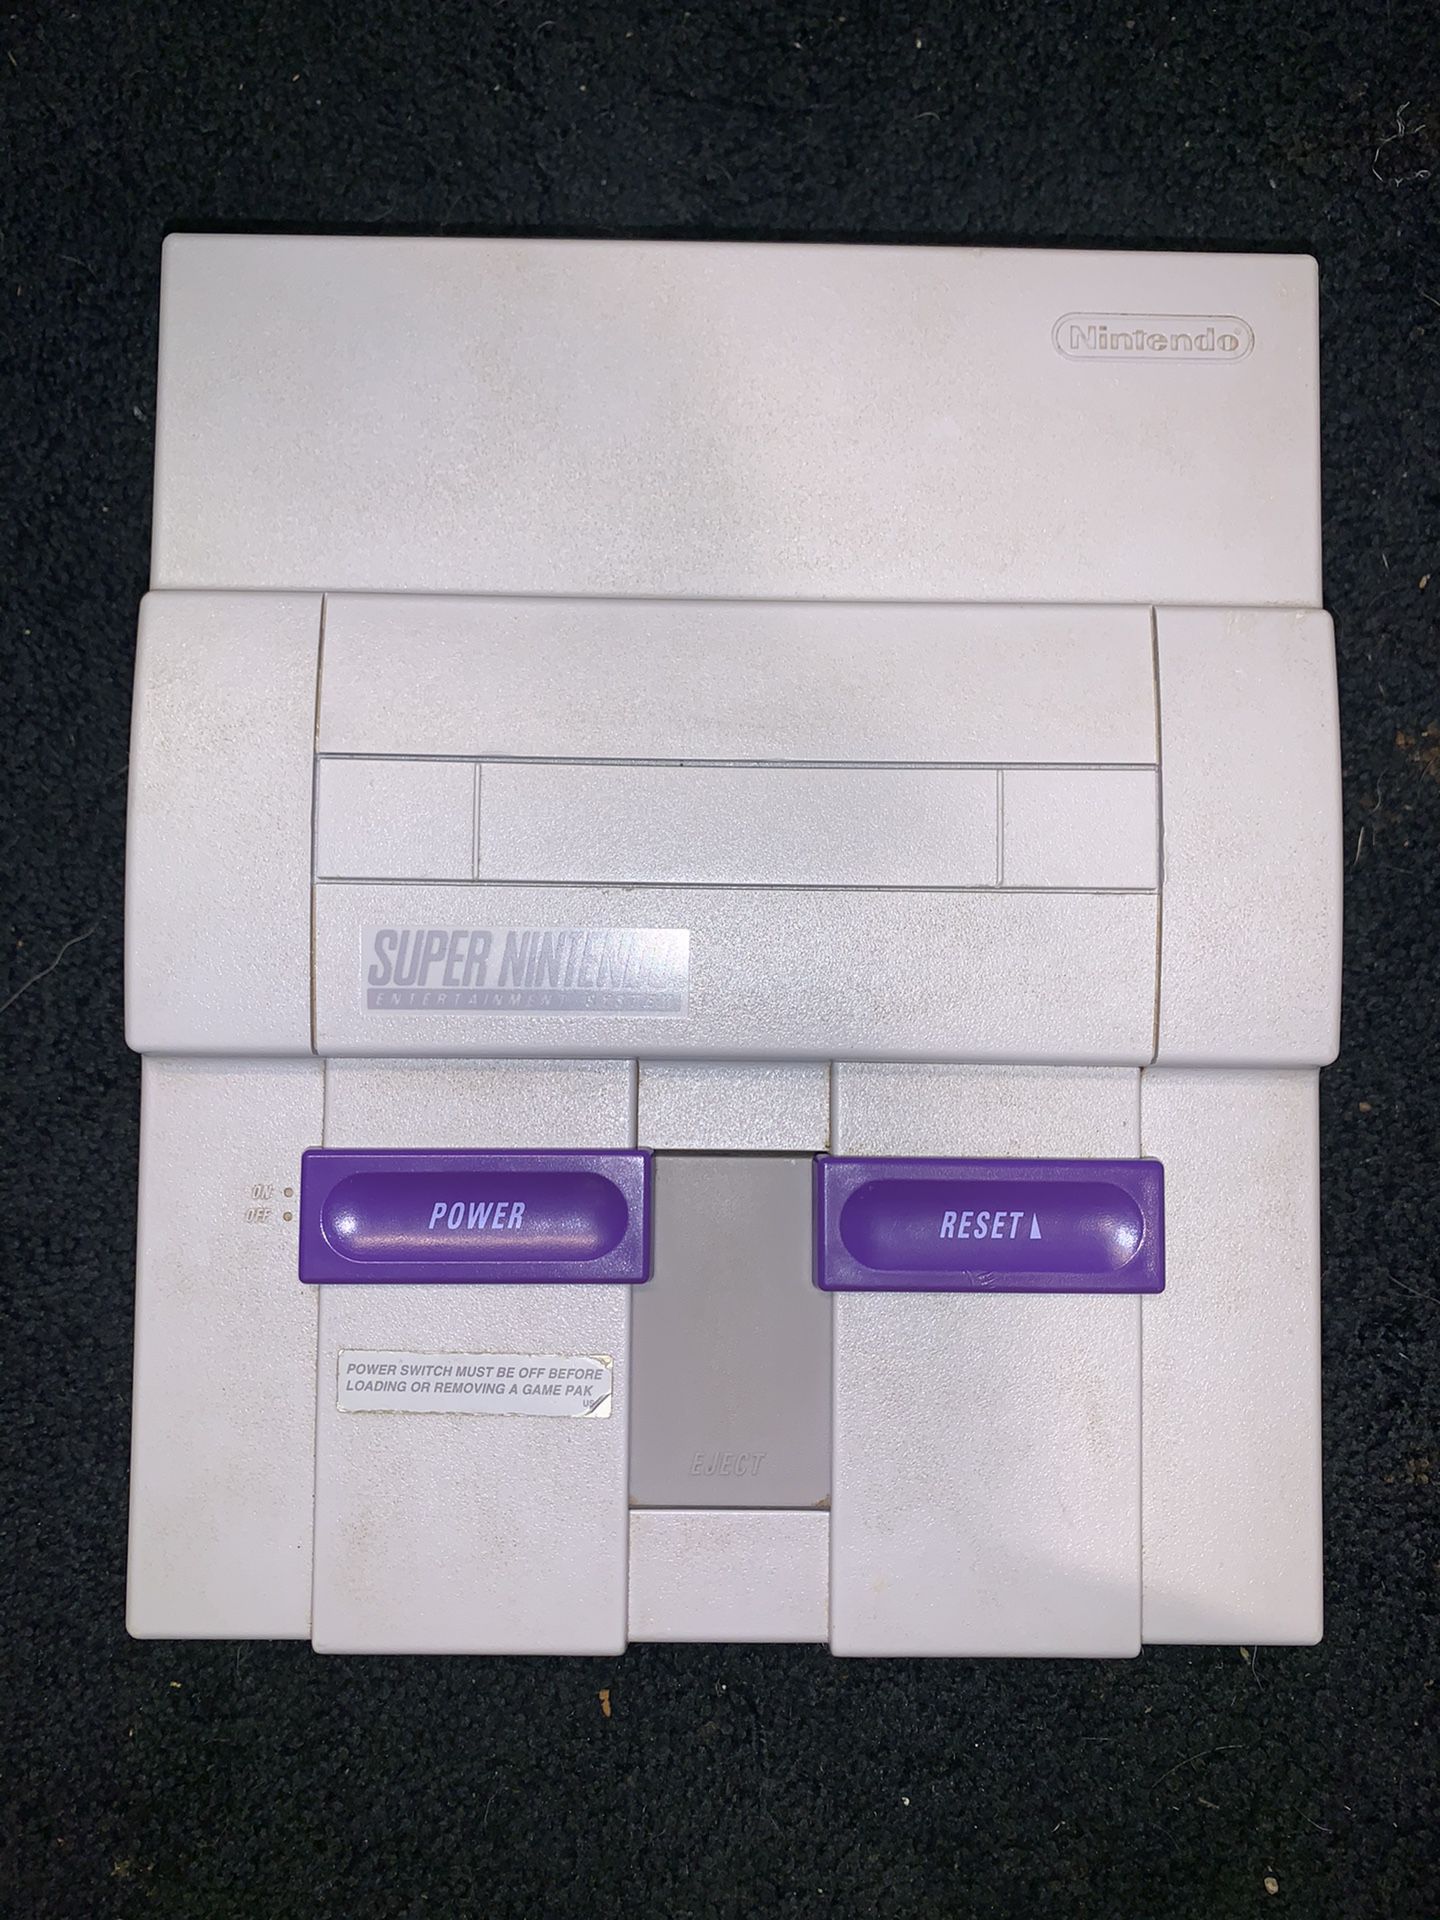 SNES Game system